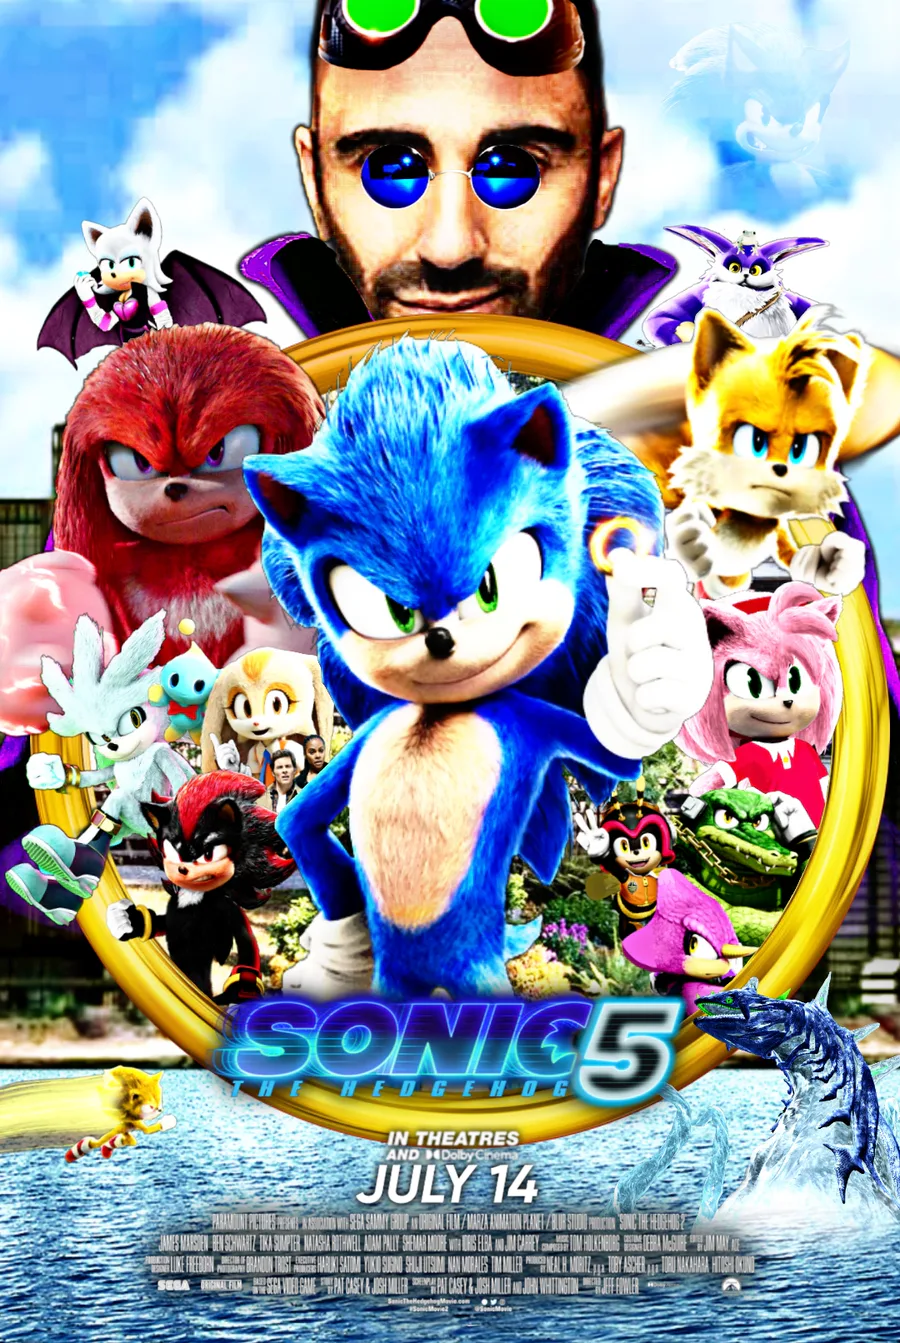 Sonic The Hedgehog Movie 5 (2028) title logo and videos are coming soon  [fan made scene] 